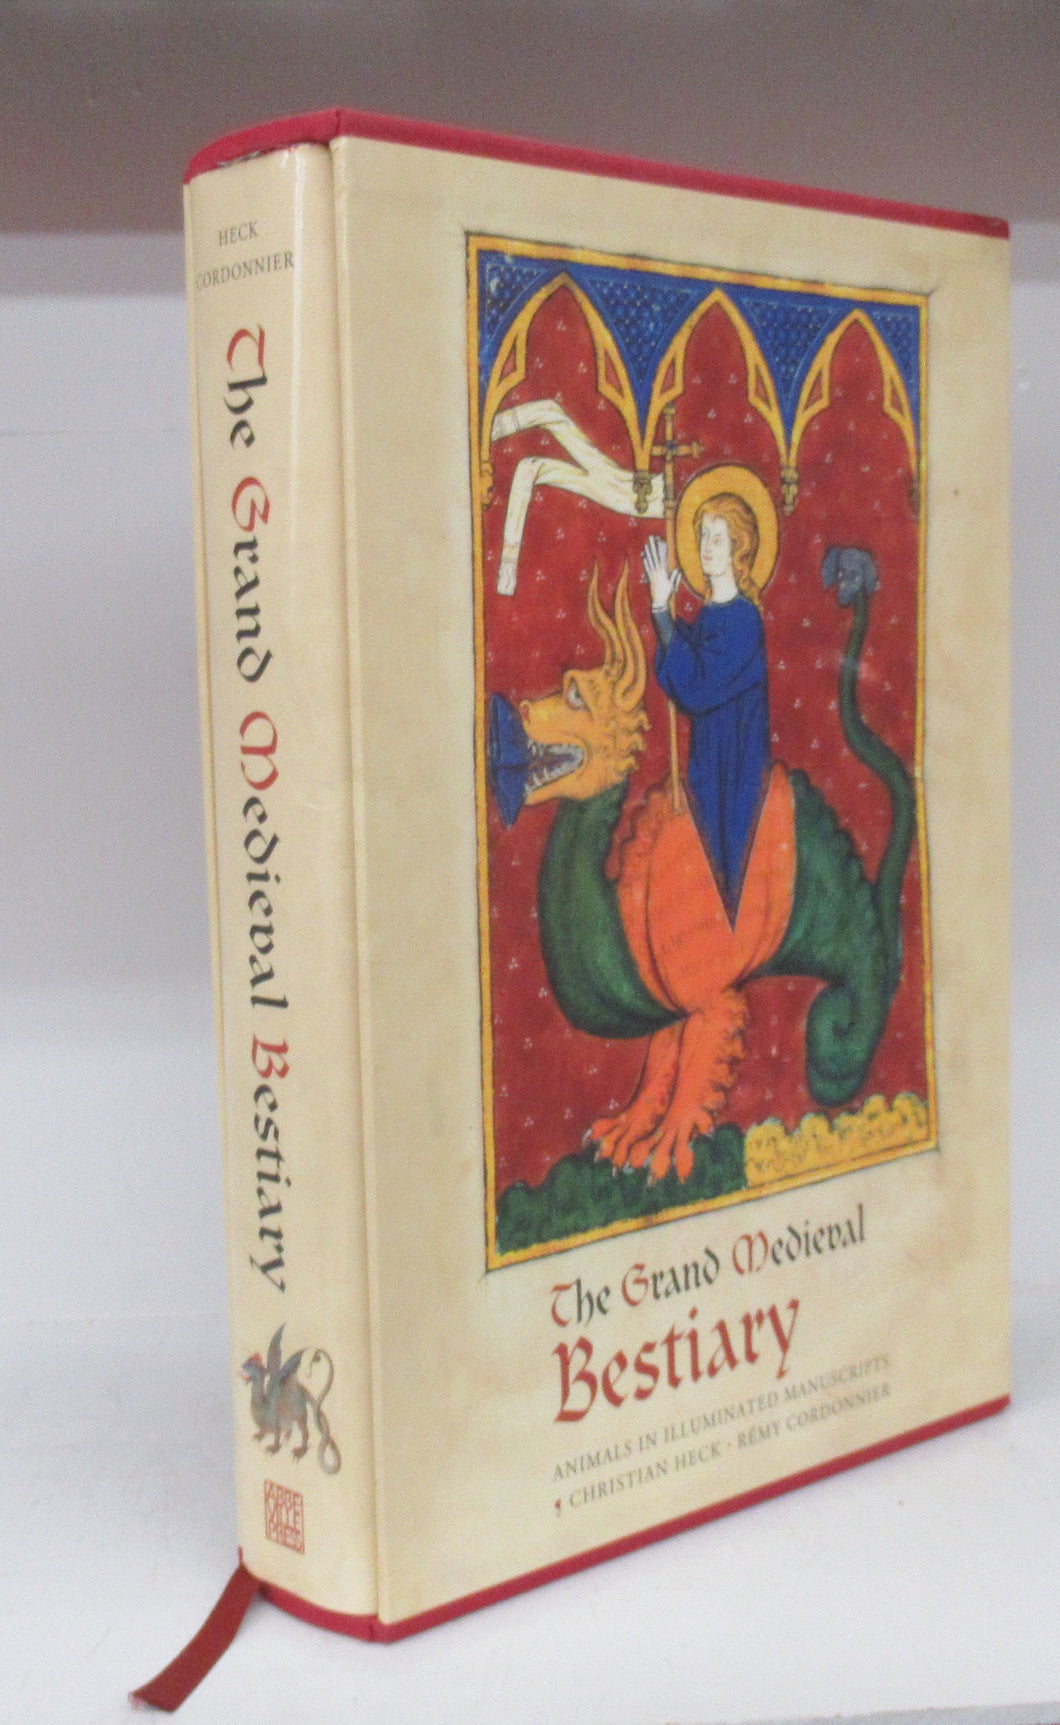 The Grand Medieval Bestiary: Animals in Illuminated Manuscripts